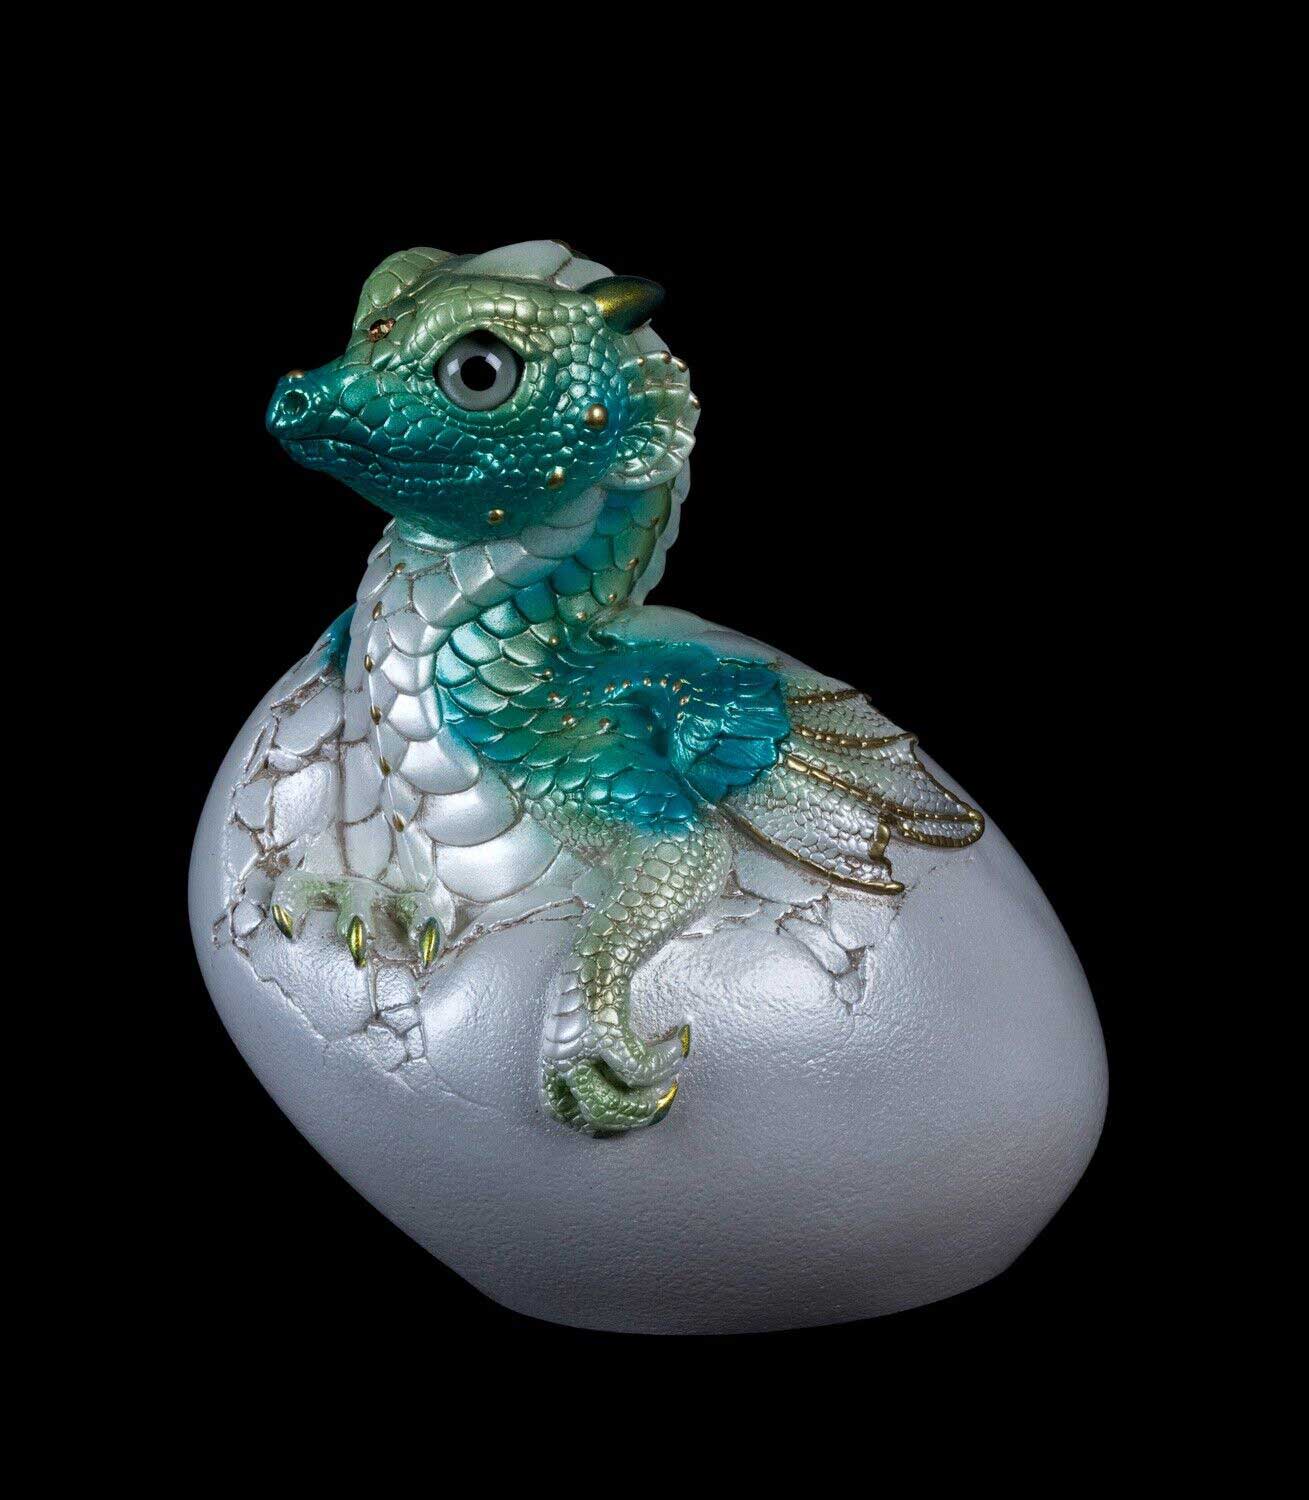 20230508-Seaglass-Hatching-Empress-Dragon-Test-Paint-1-by-Gina